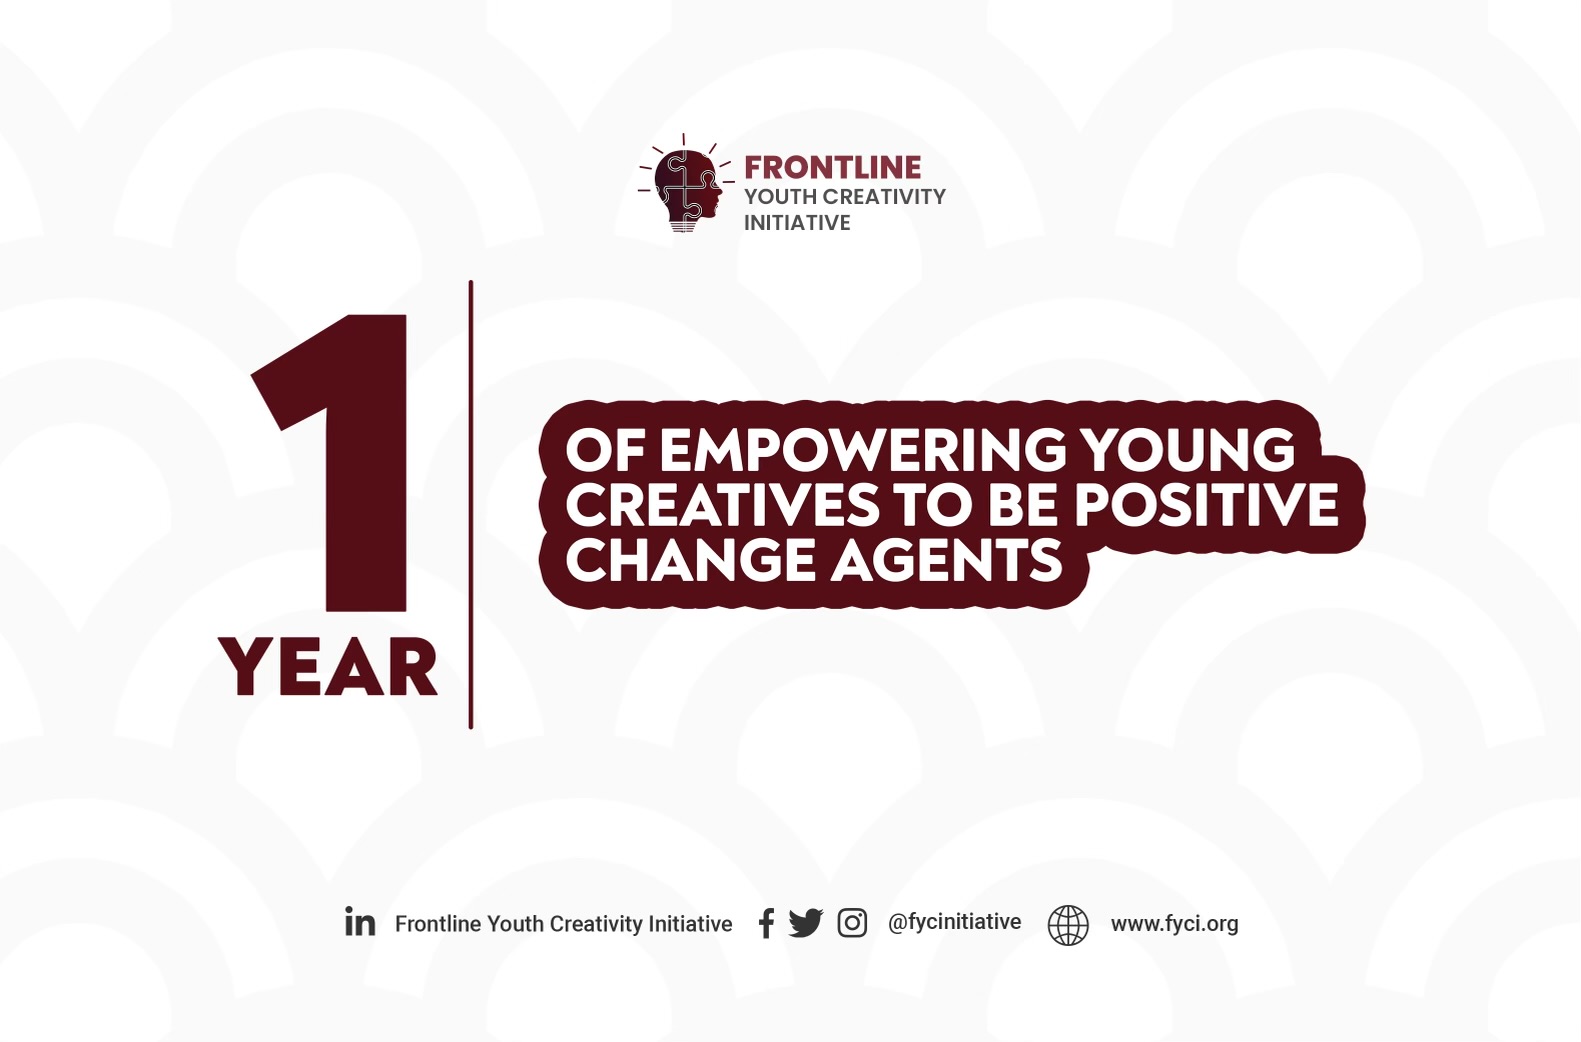 1 year of empowering young creatives to be positive change agents